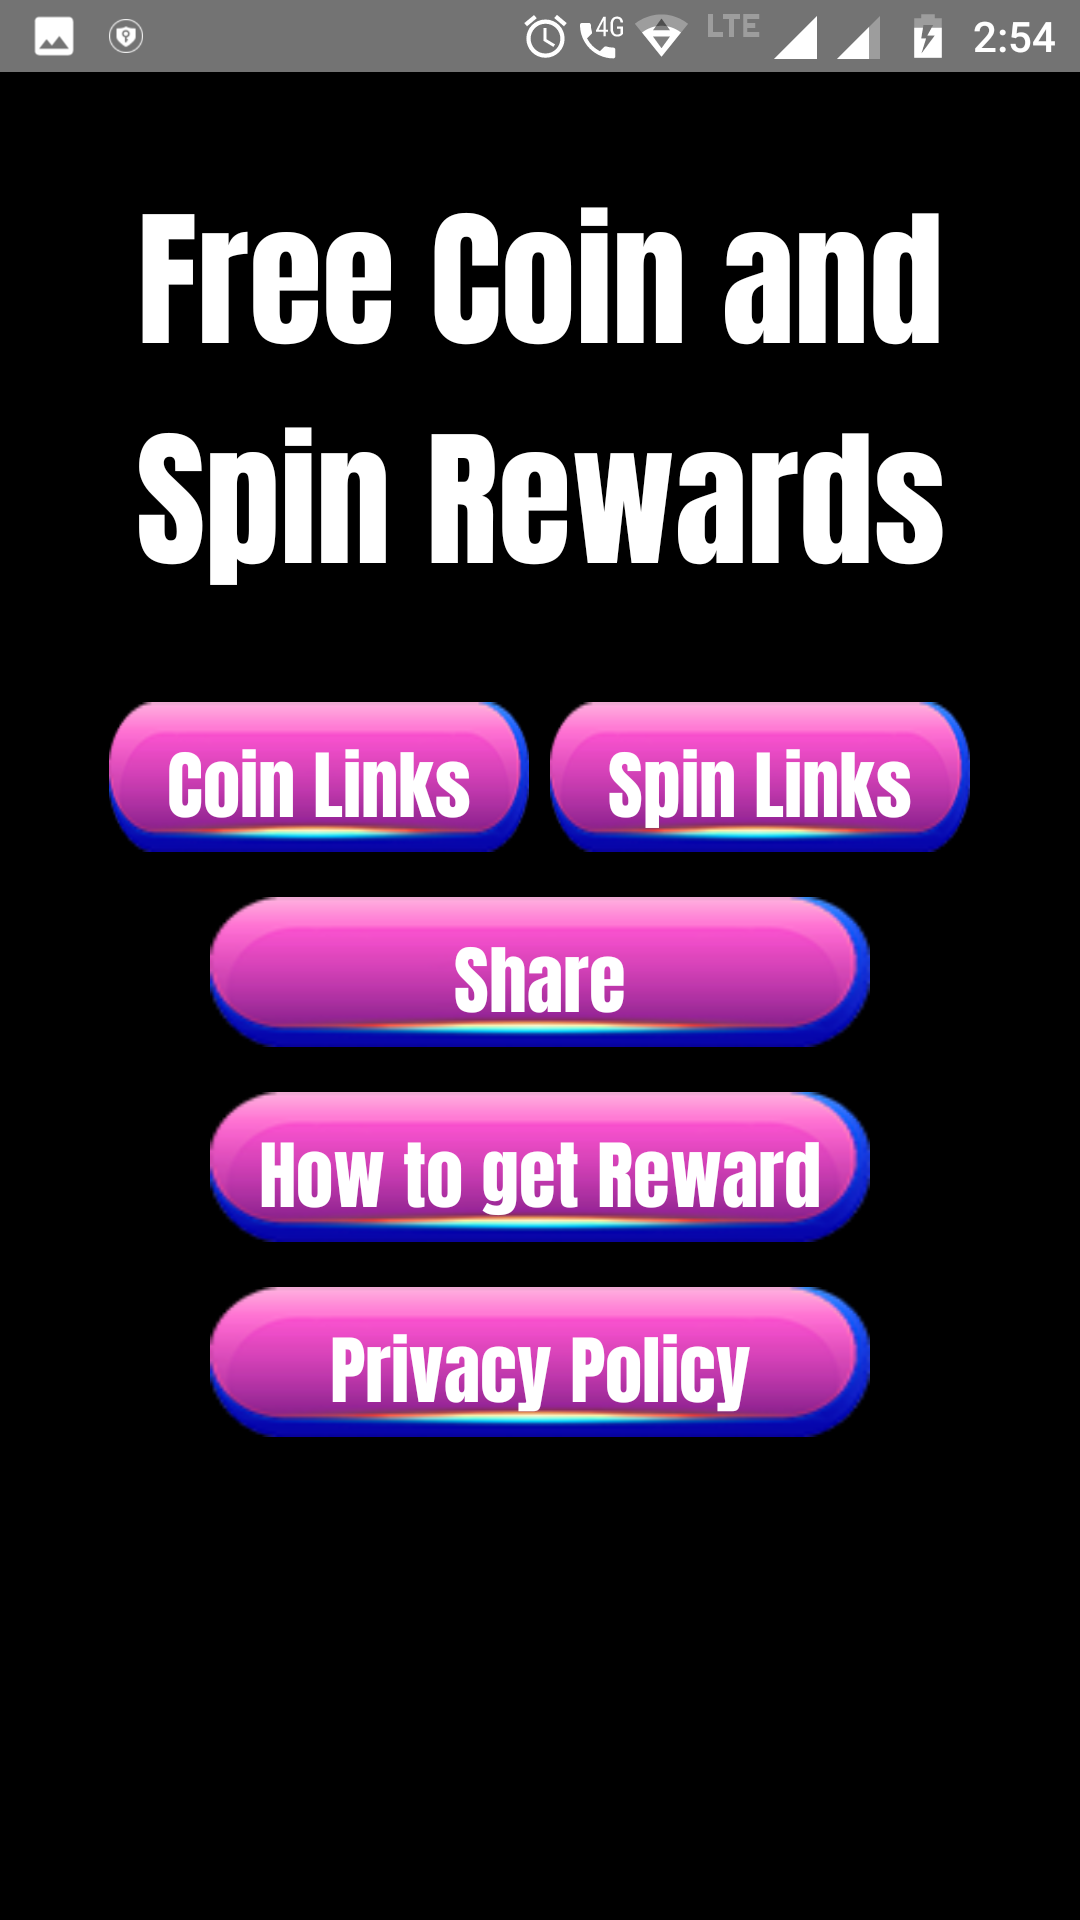 Screenshot of Coin and Spin Rewards